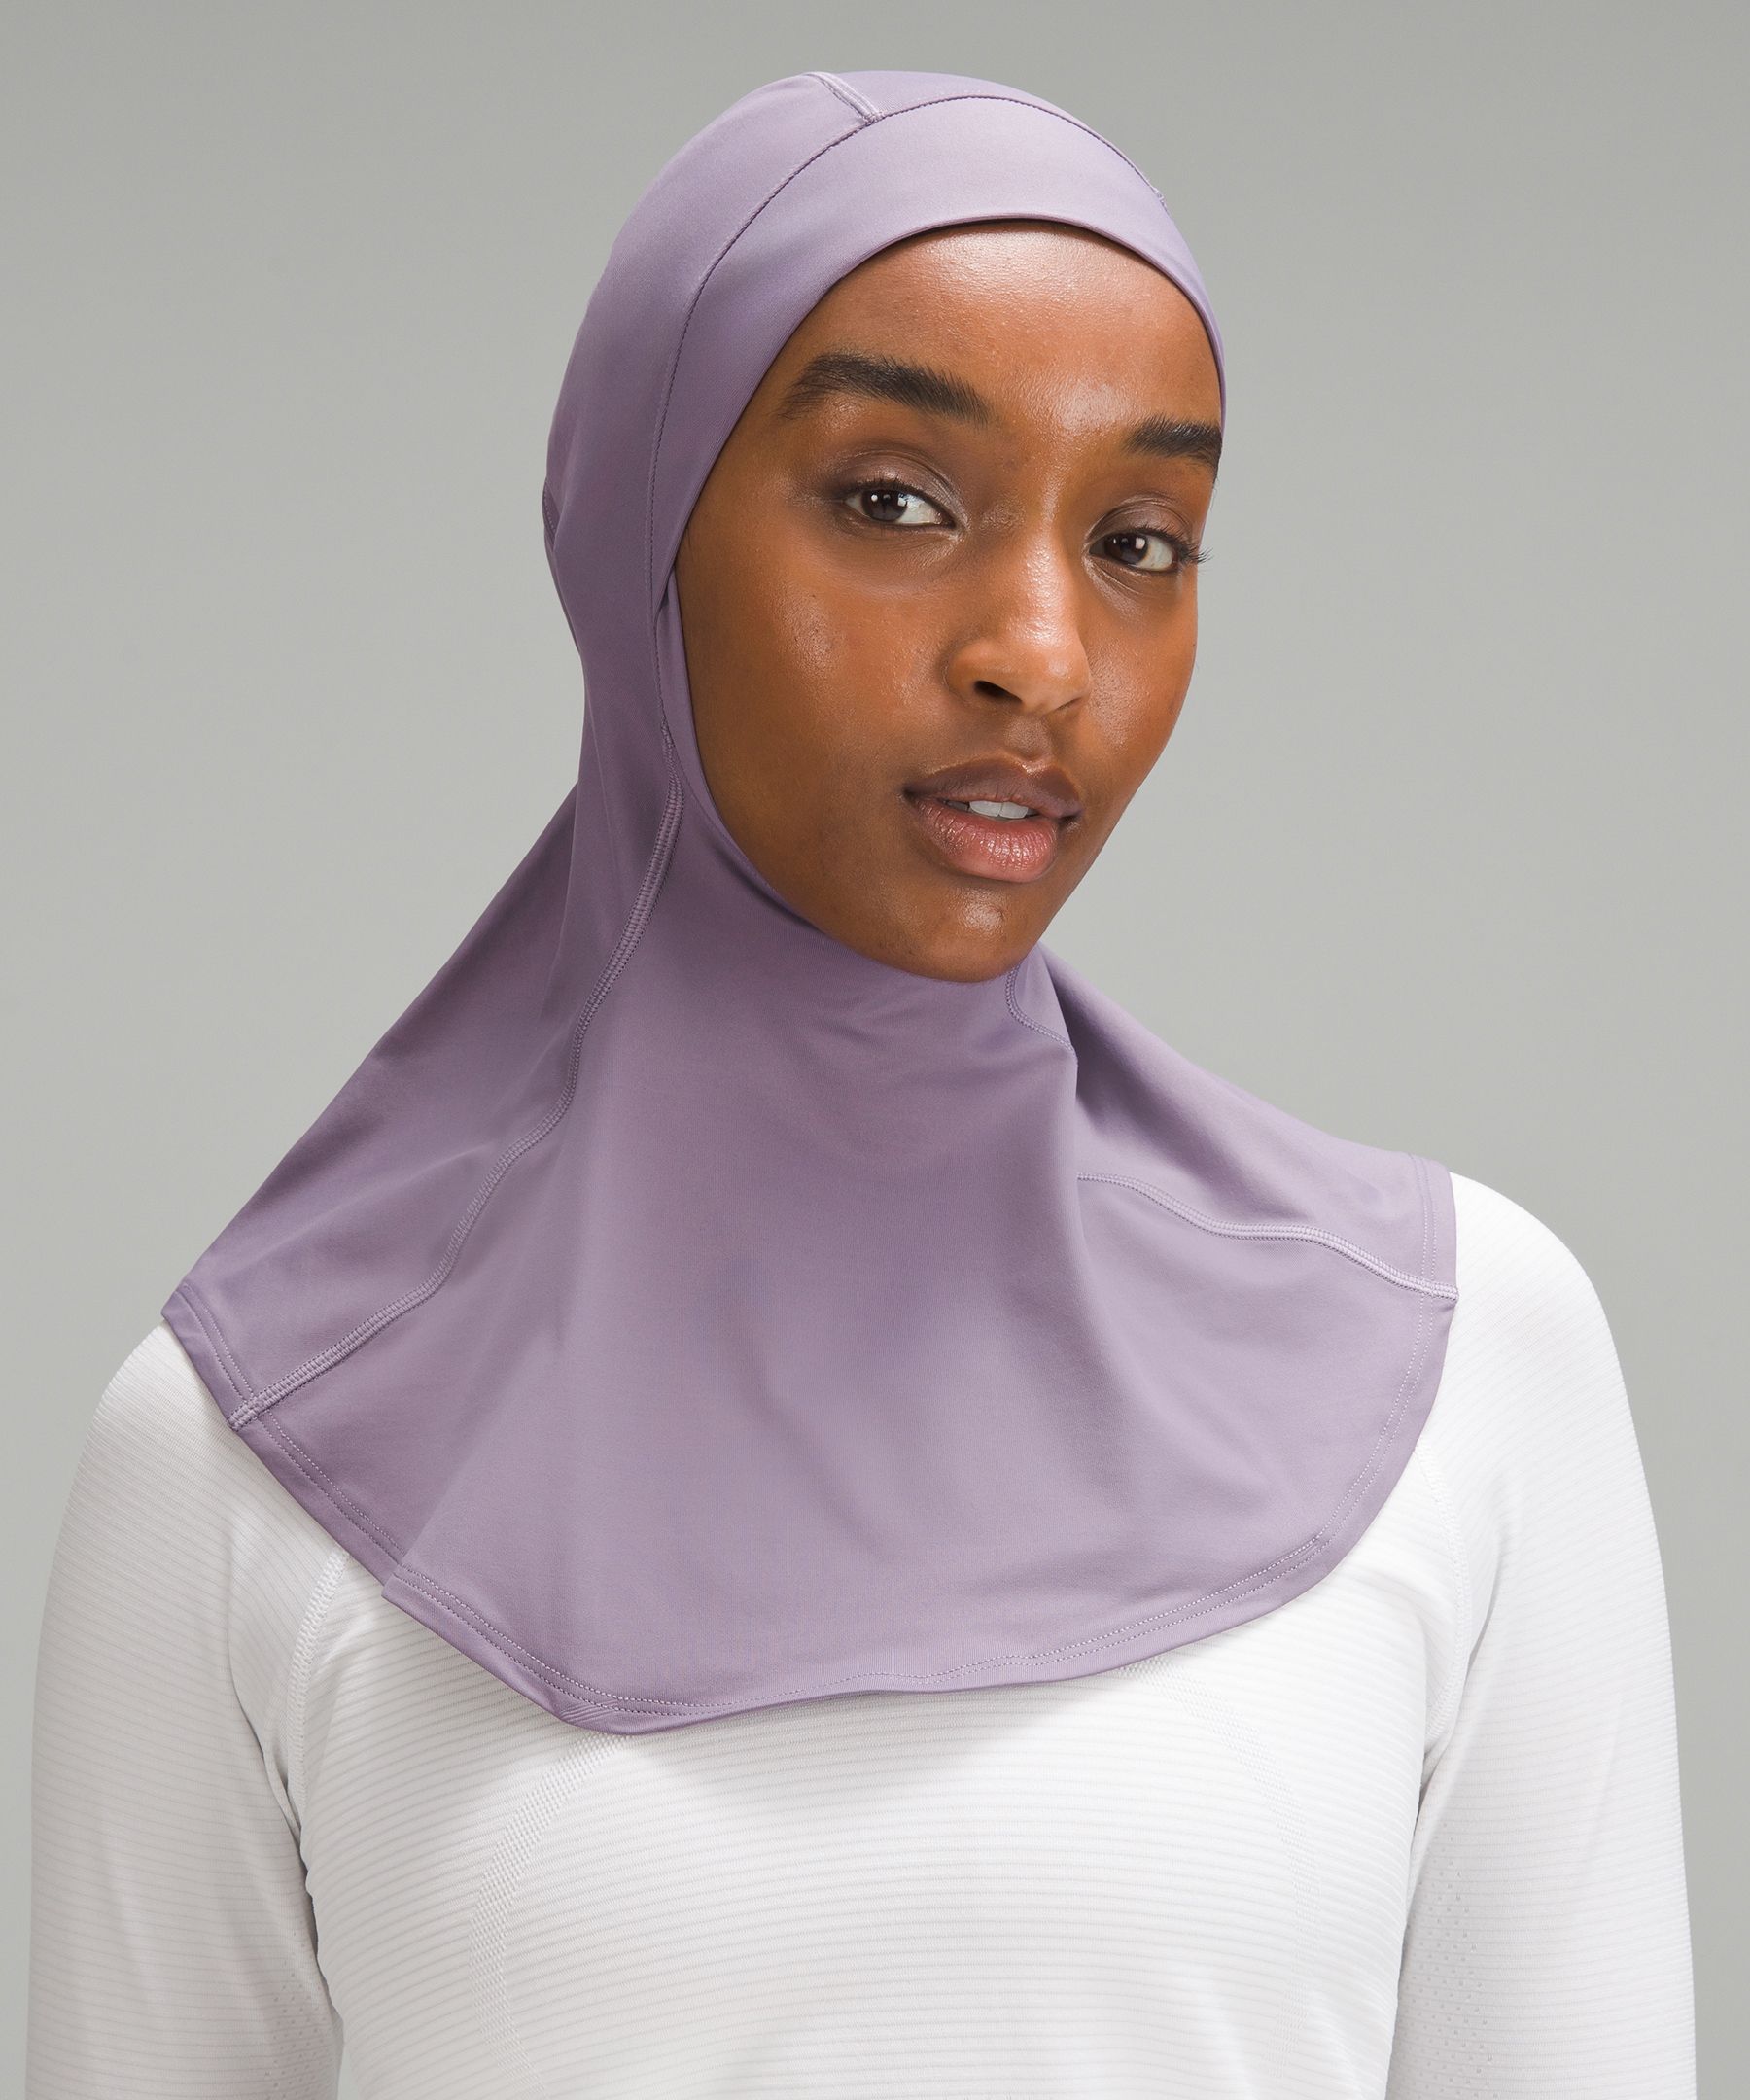 6 sports hijabs that will keep you cool at your next workout session